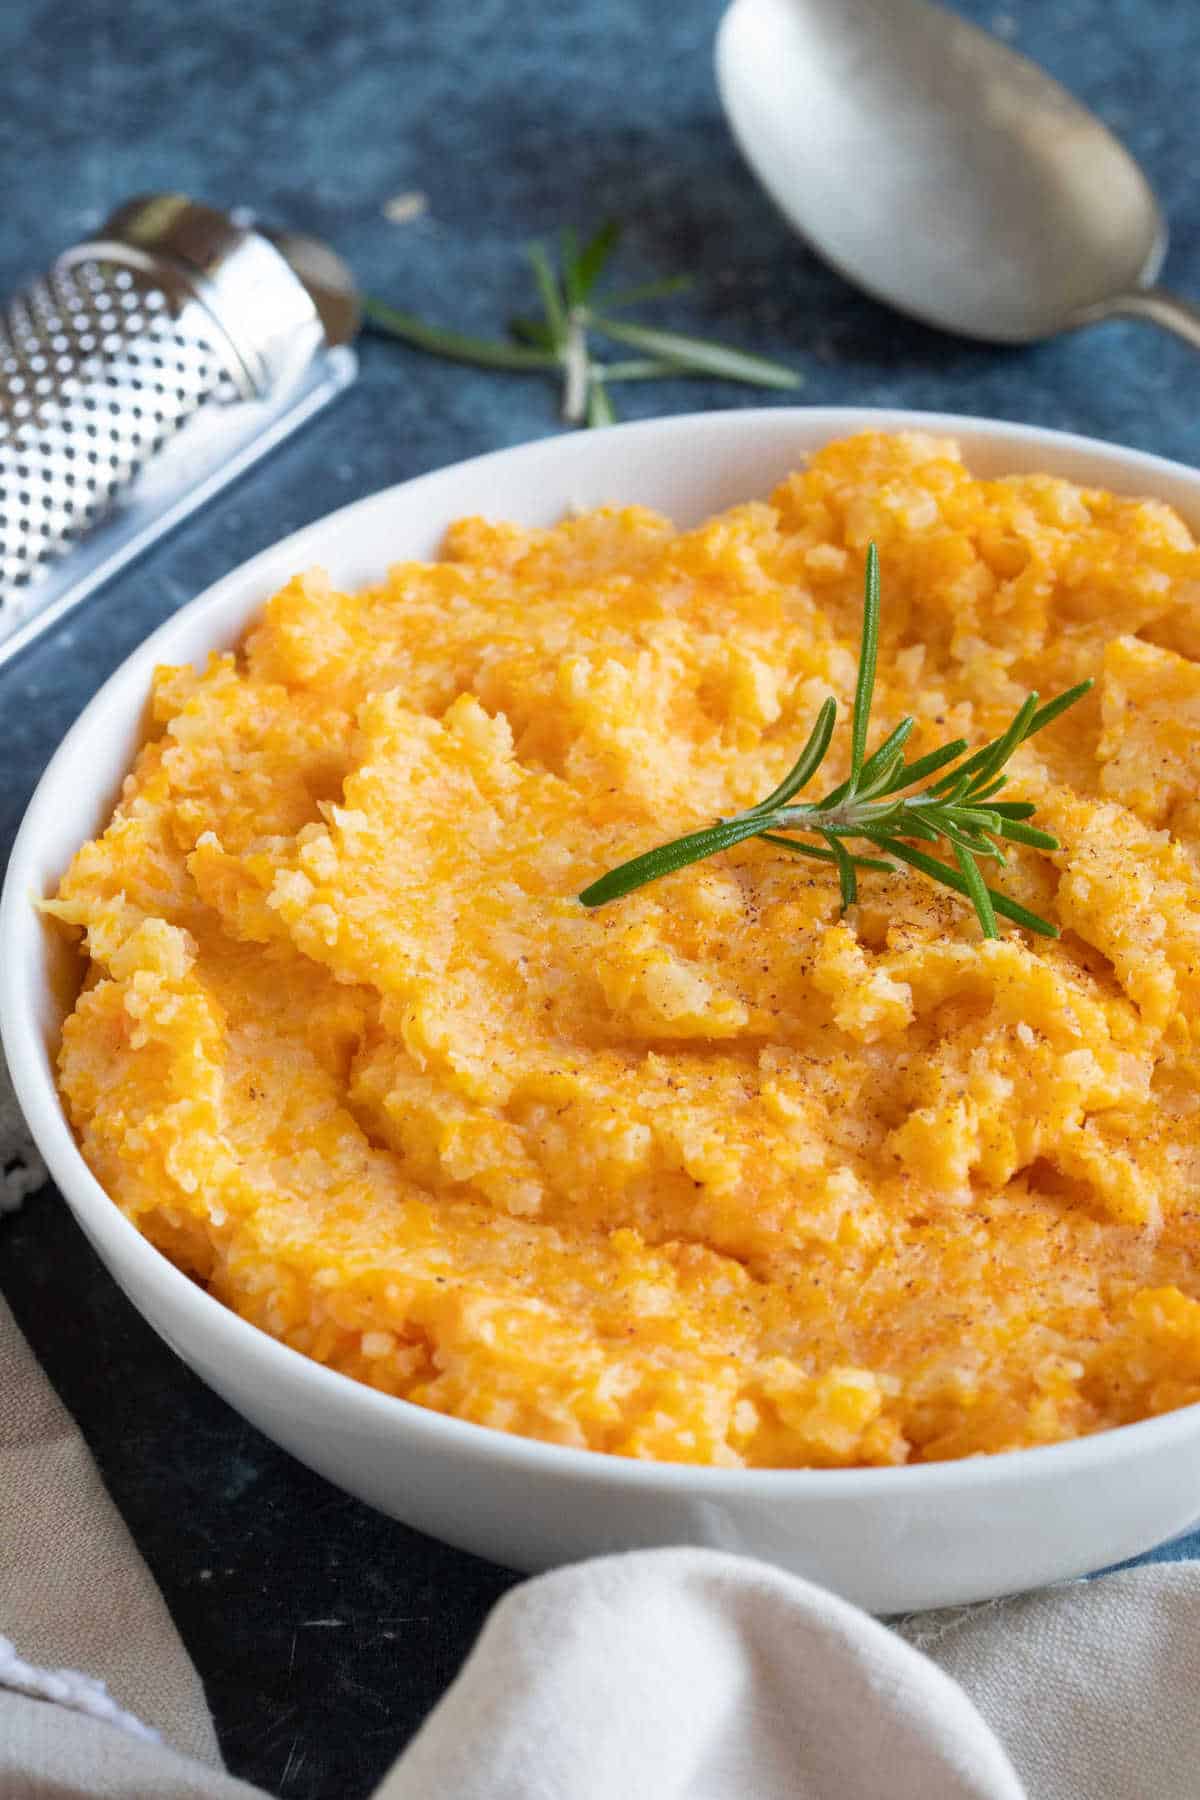 A bowl of creamy carrot and swede mash.